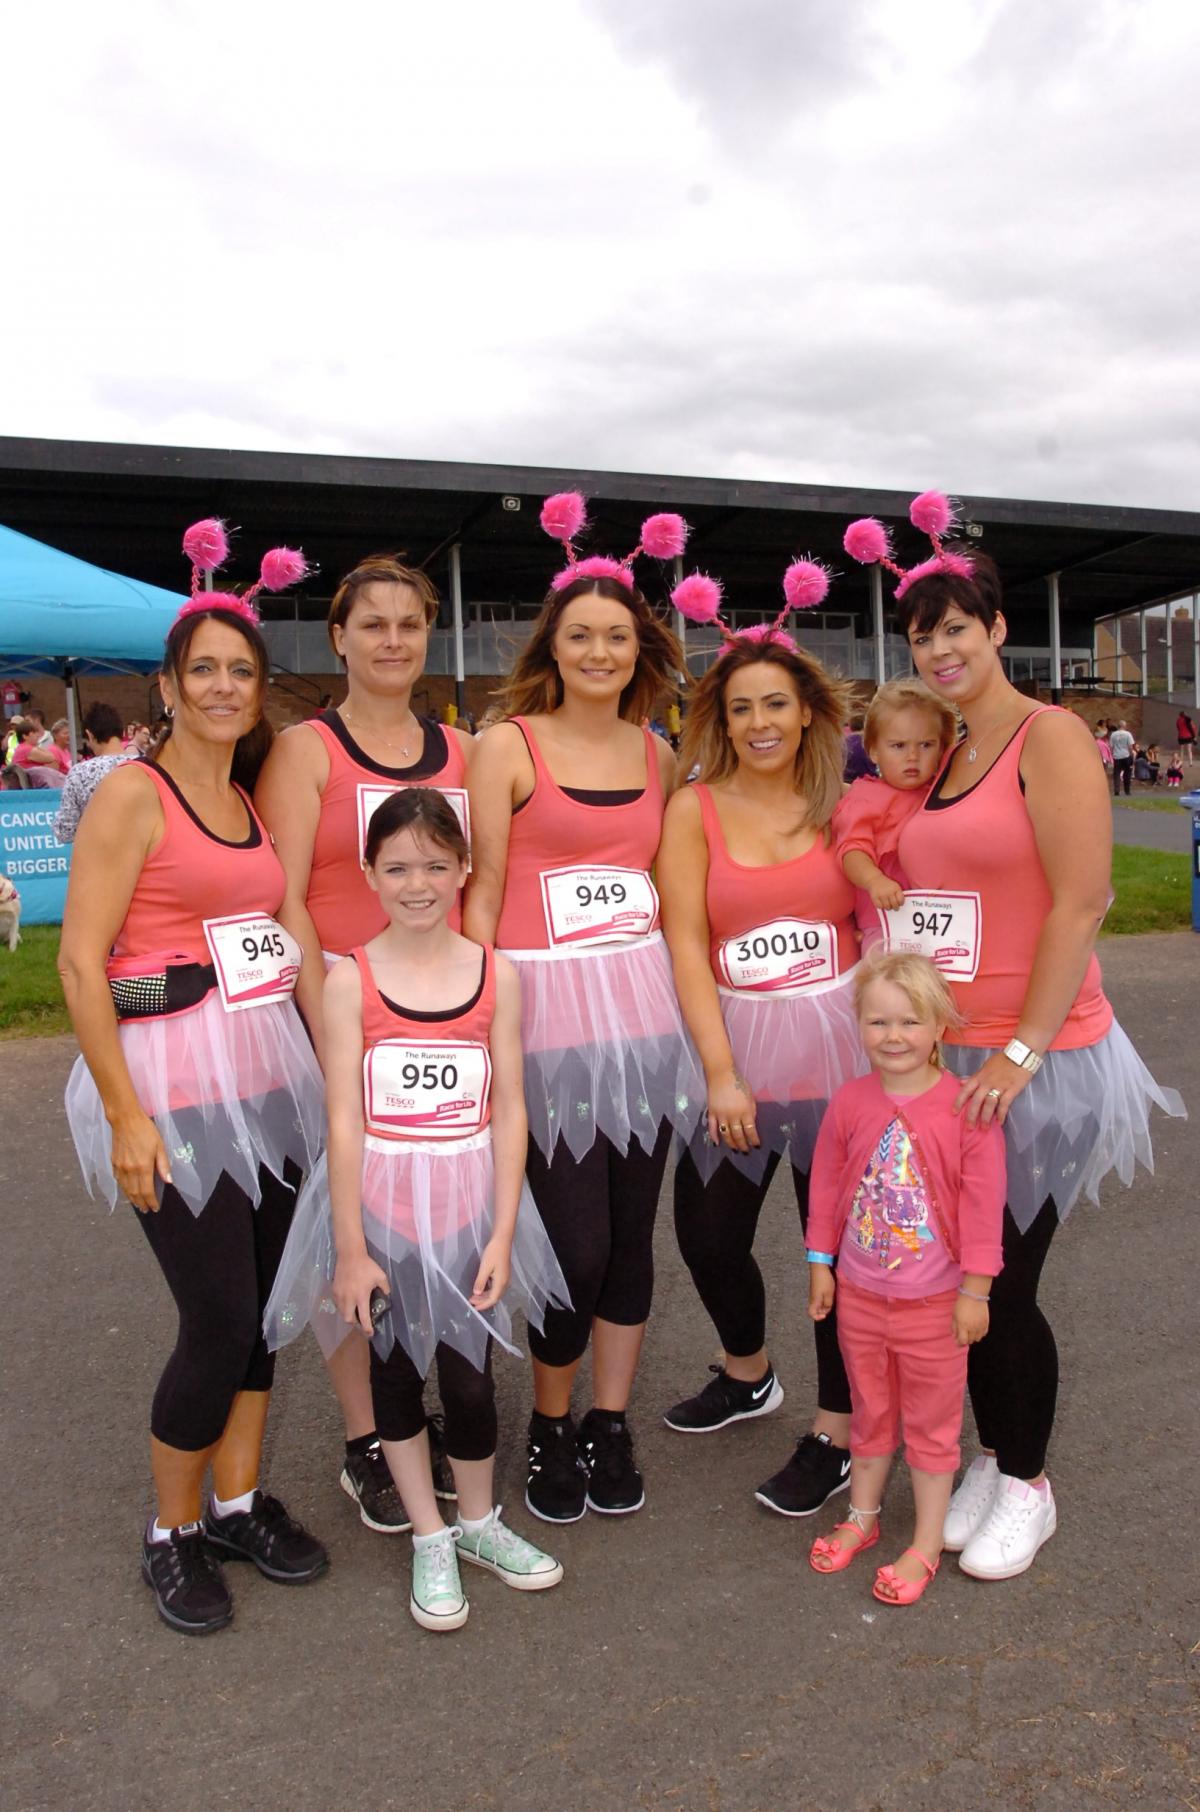 Cancer Reasearch UK's Race for Life 2014 at Hereford Racecourse.
Back from left, Sarah Morgan, Charlotte Morris, Molly Perks, Laura Chapman, Annie McGowan, Ebonnie McGowan, front, Thalia Morgan, Lily McGowan. 1428_19004